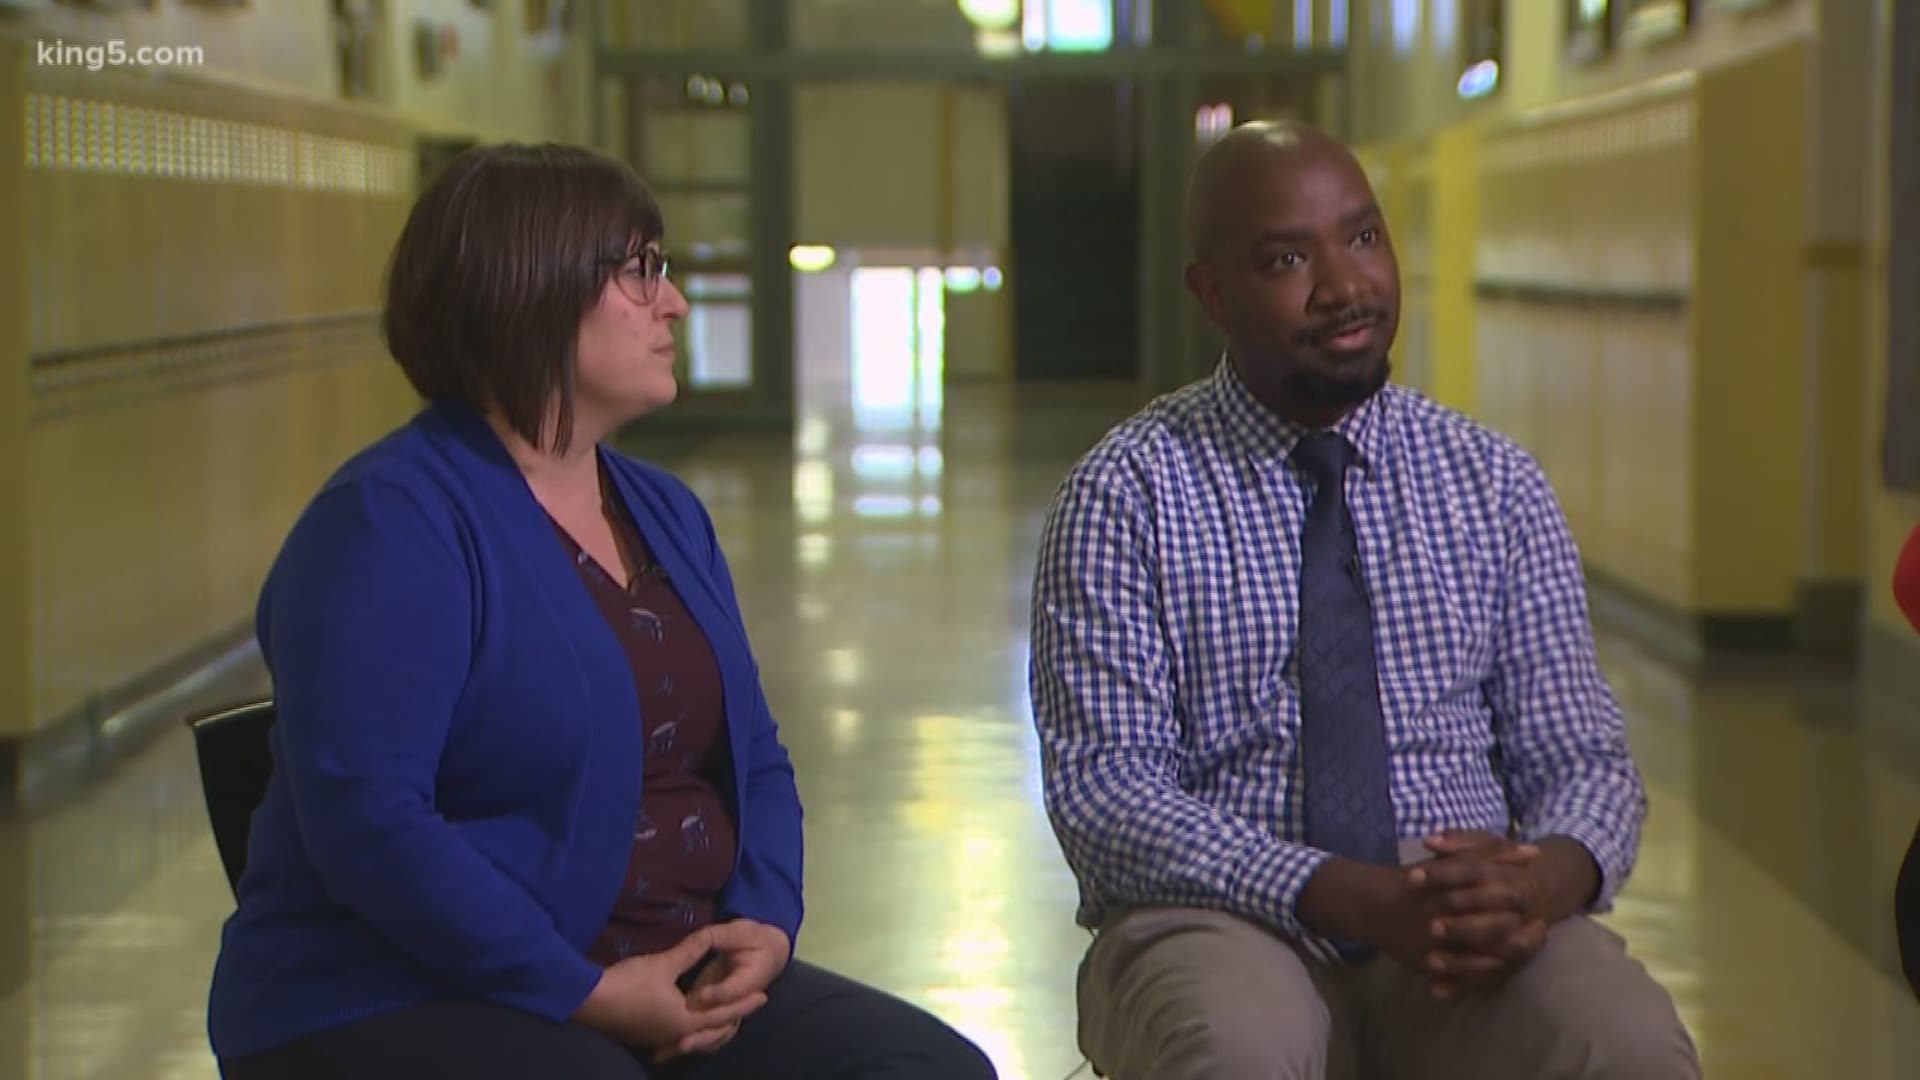 They are teachers, community leaders, and activists who have made a huge impact in the south sound and across Washington state. Lincoln High School Teachers Hope Teague Bowling and Nathan Bowling are leaving Tacoma for an international teaching adventure. KING 5's Jenna Hanchard reports.